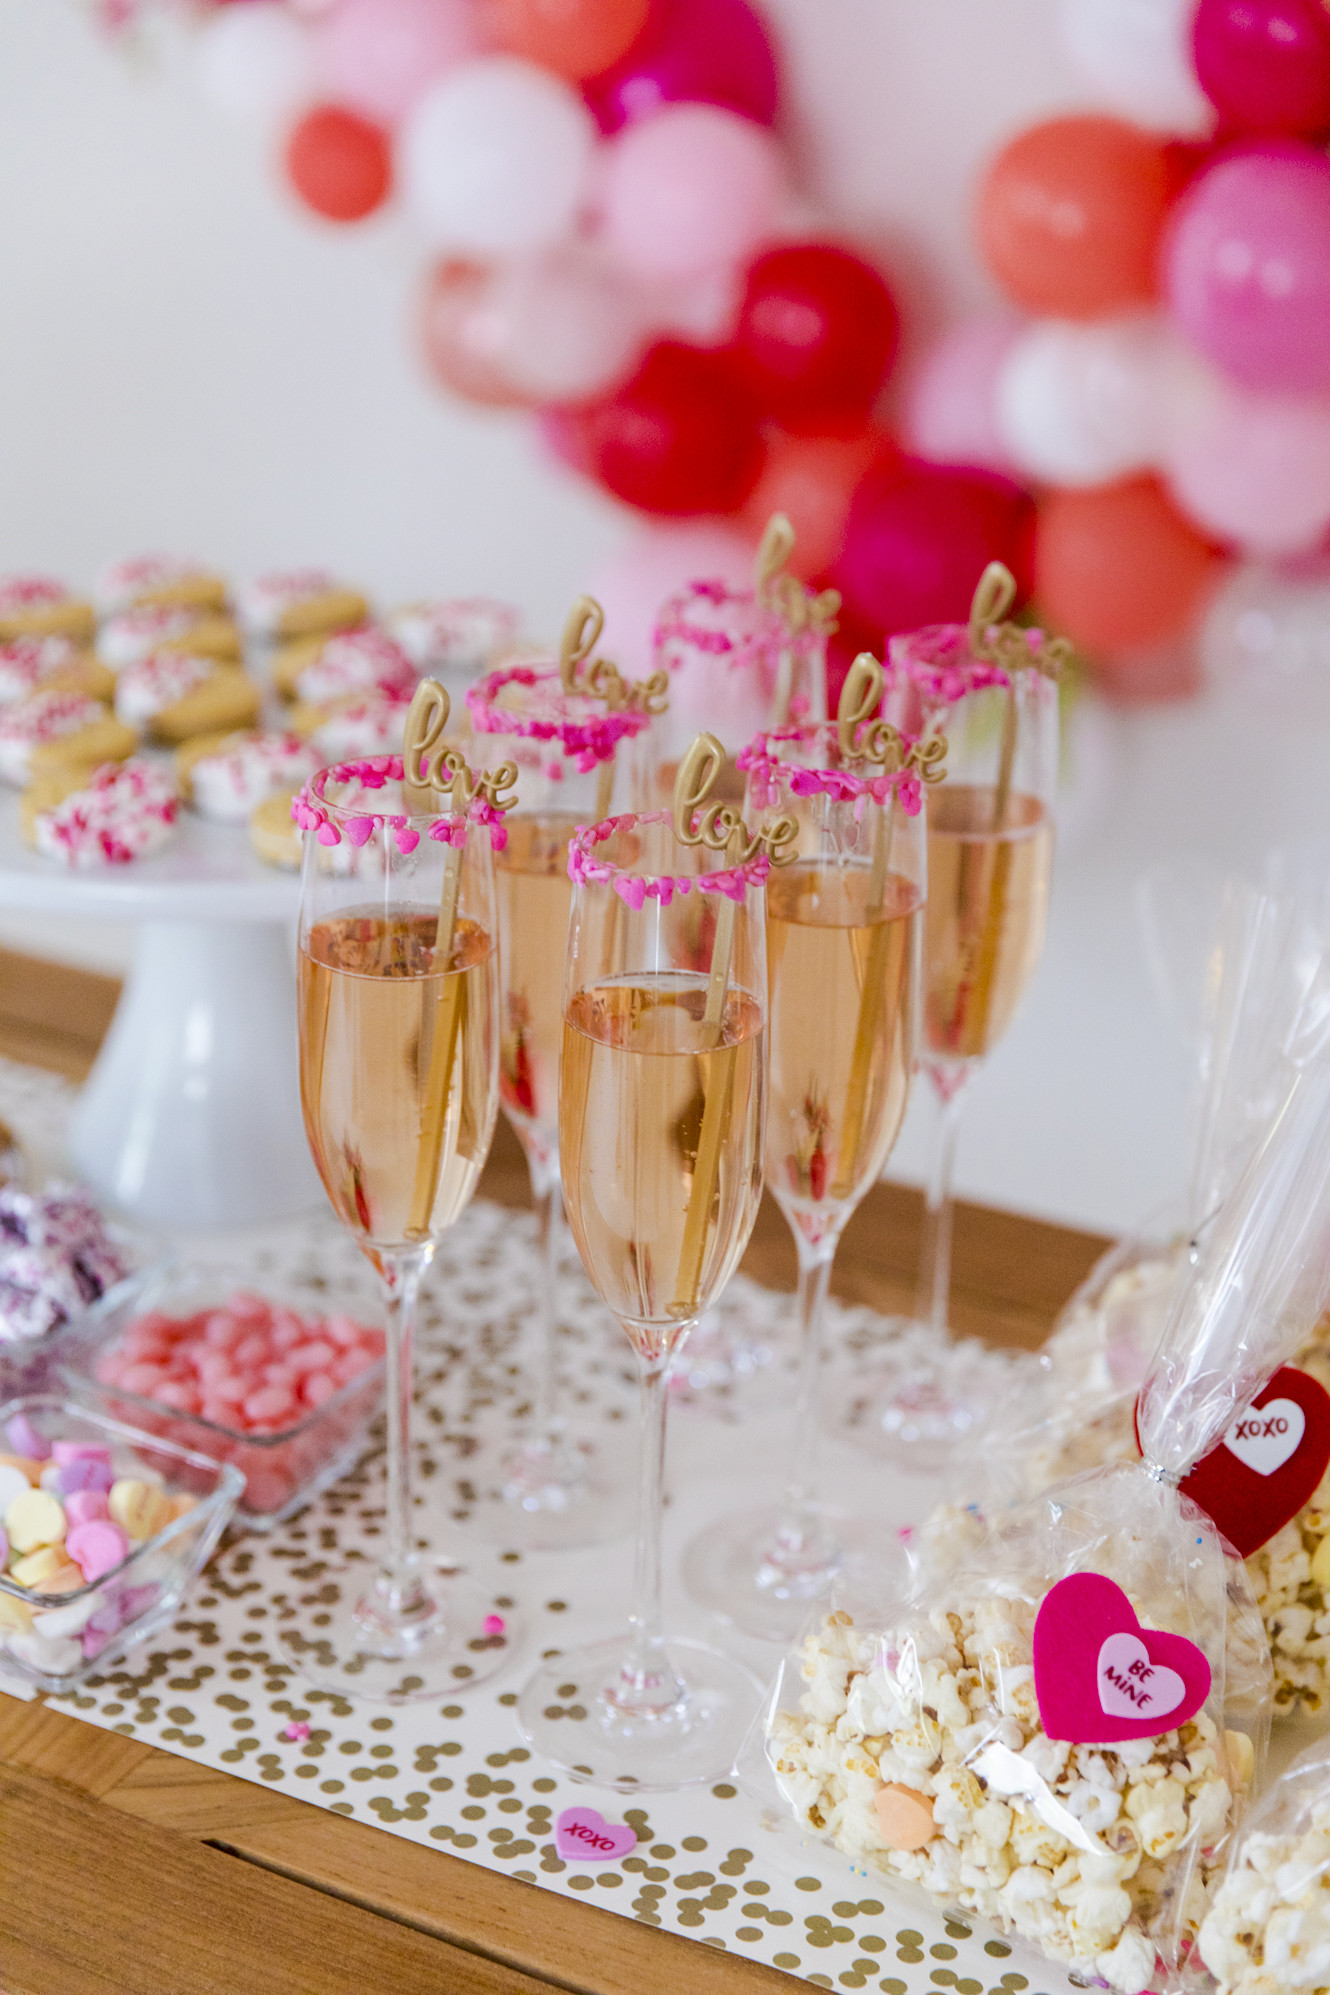 Valentines Day Party Ideas
 Six Ideas for throwing the Best Valentine s Day Party